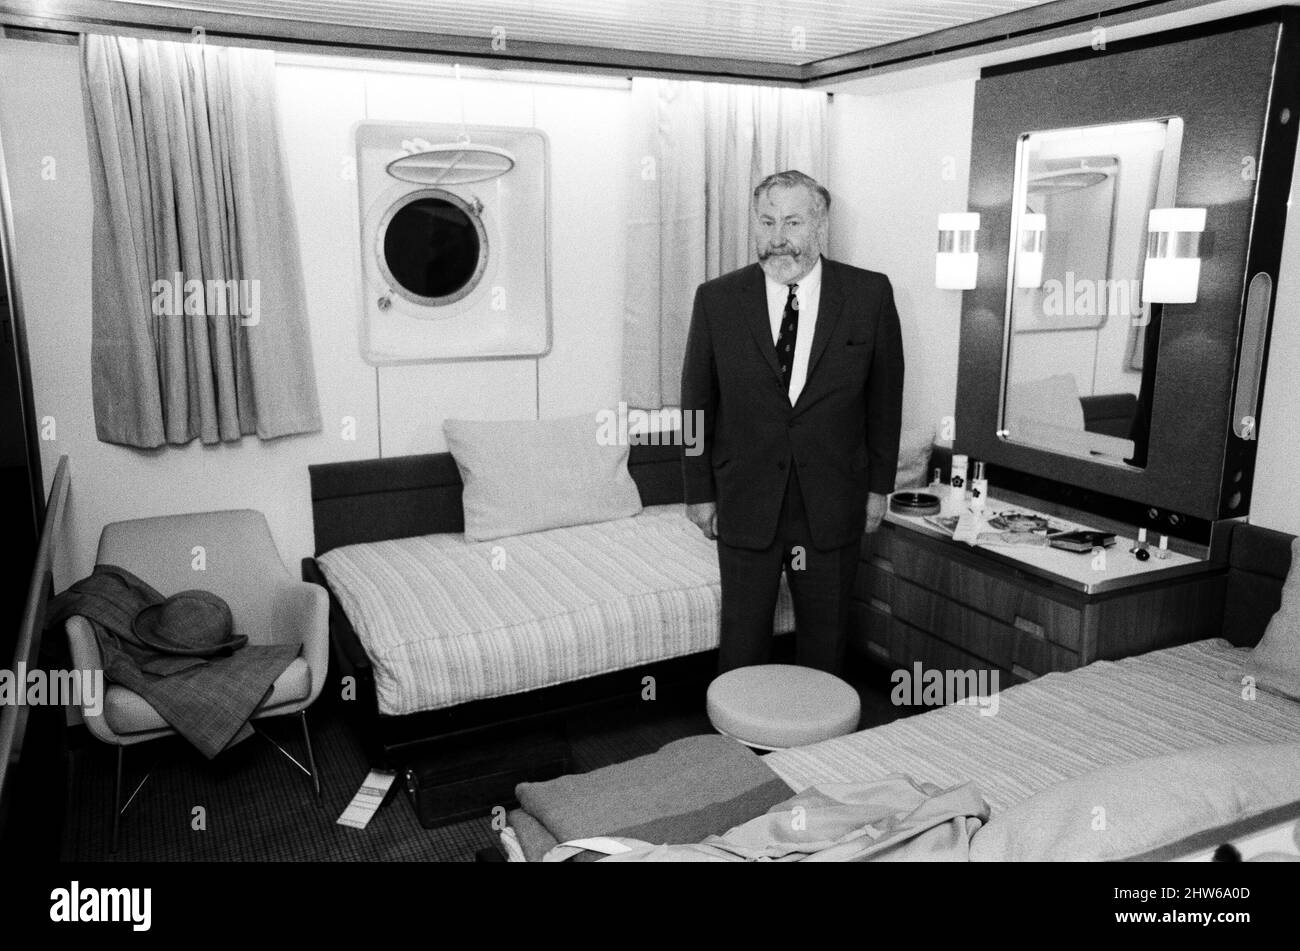 The Exhibition 'QE2 - A first look inside the new Cunarder' at The Design Centre. The exhibition gives the first general impression of some of the interior designs for the Queen Elizabeth 2, with full scale mock-ups cabins. Pictured, the new captain of the QE2, William Wawick, in a mock up of a typical tourist class cabin. London, 20th February 1968. Stock Photo